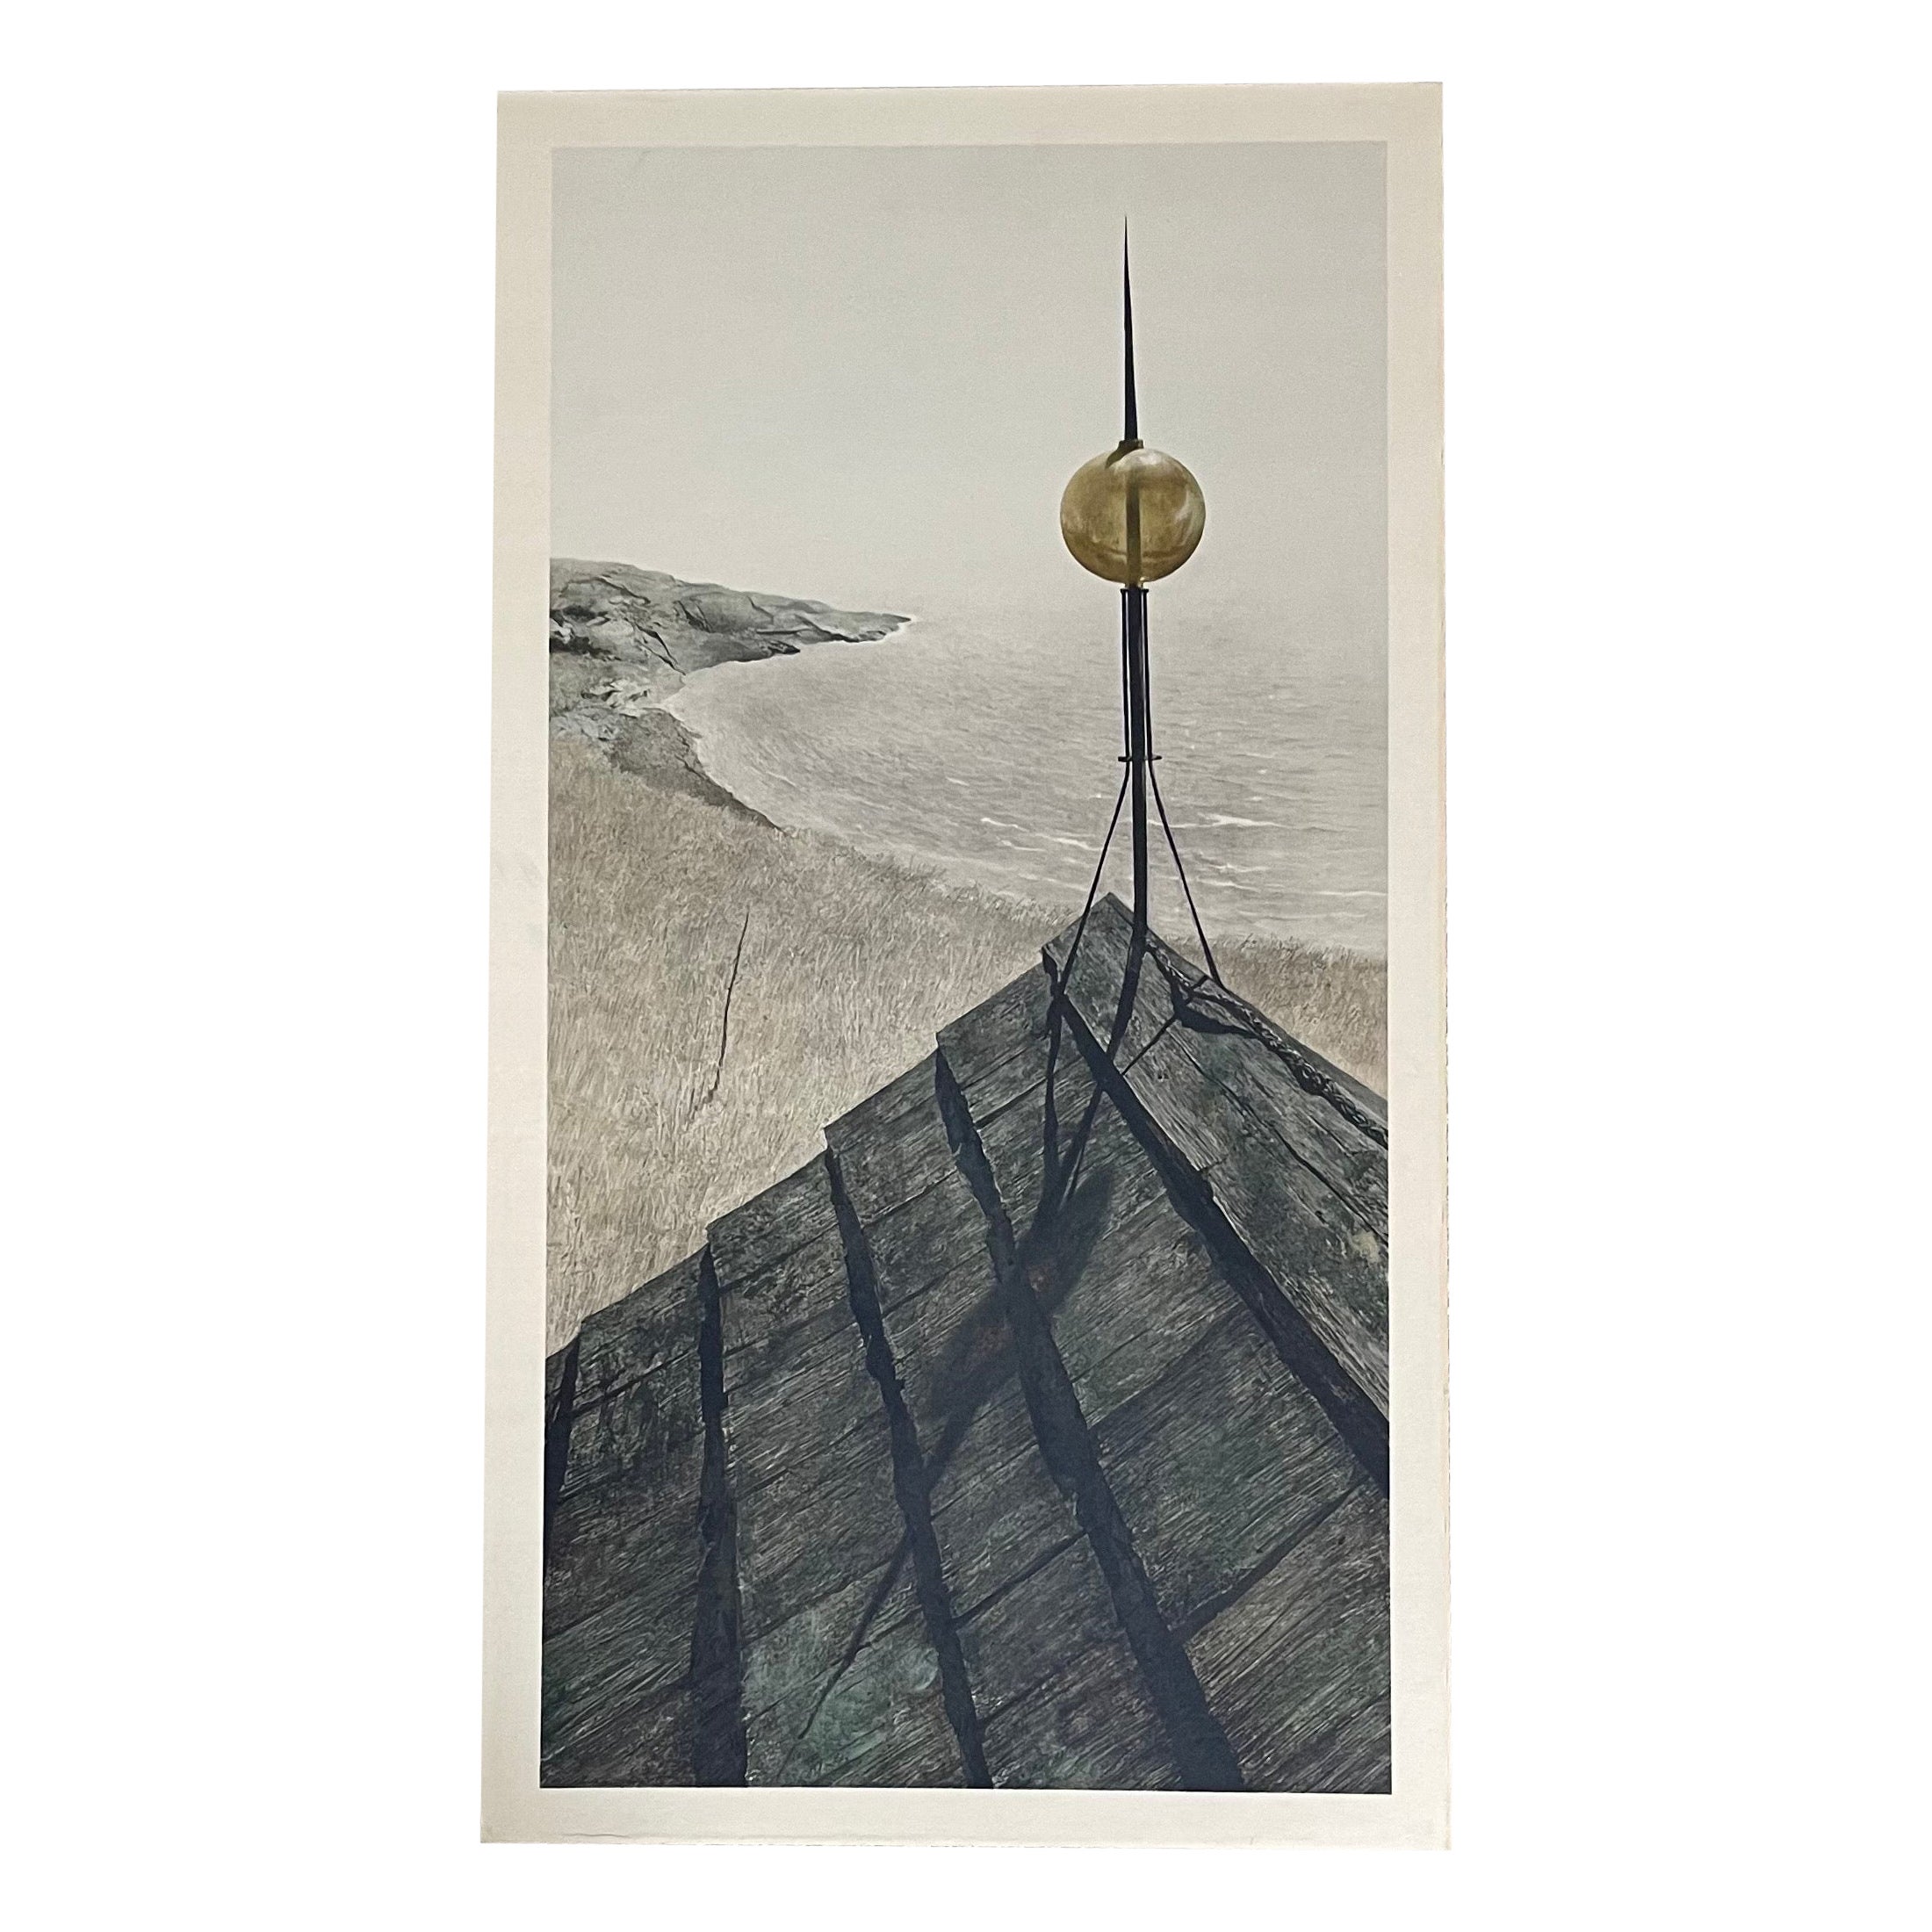  "Nothern Point" Color Collotype Print by Andrew Wyeth